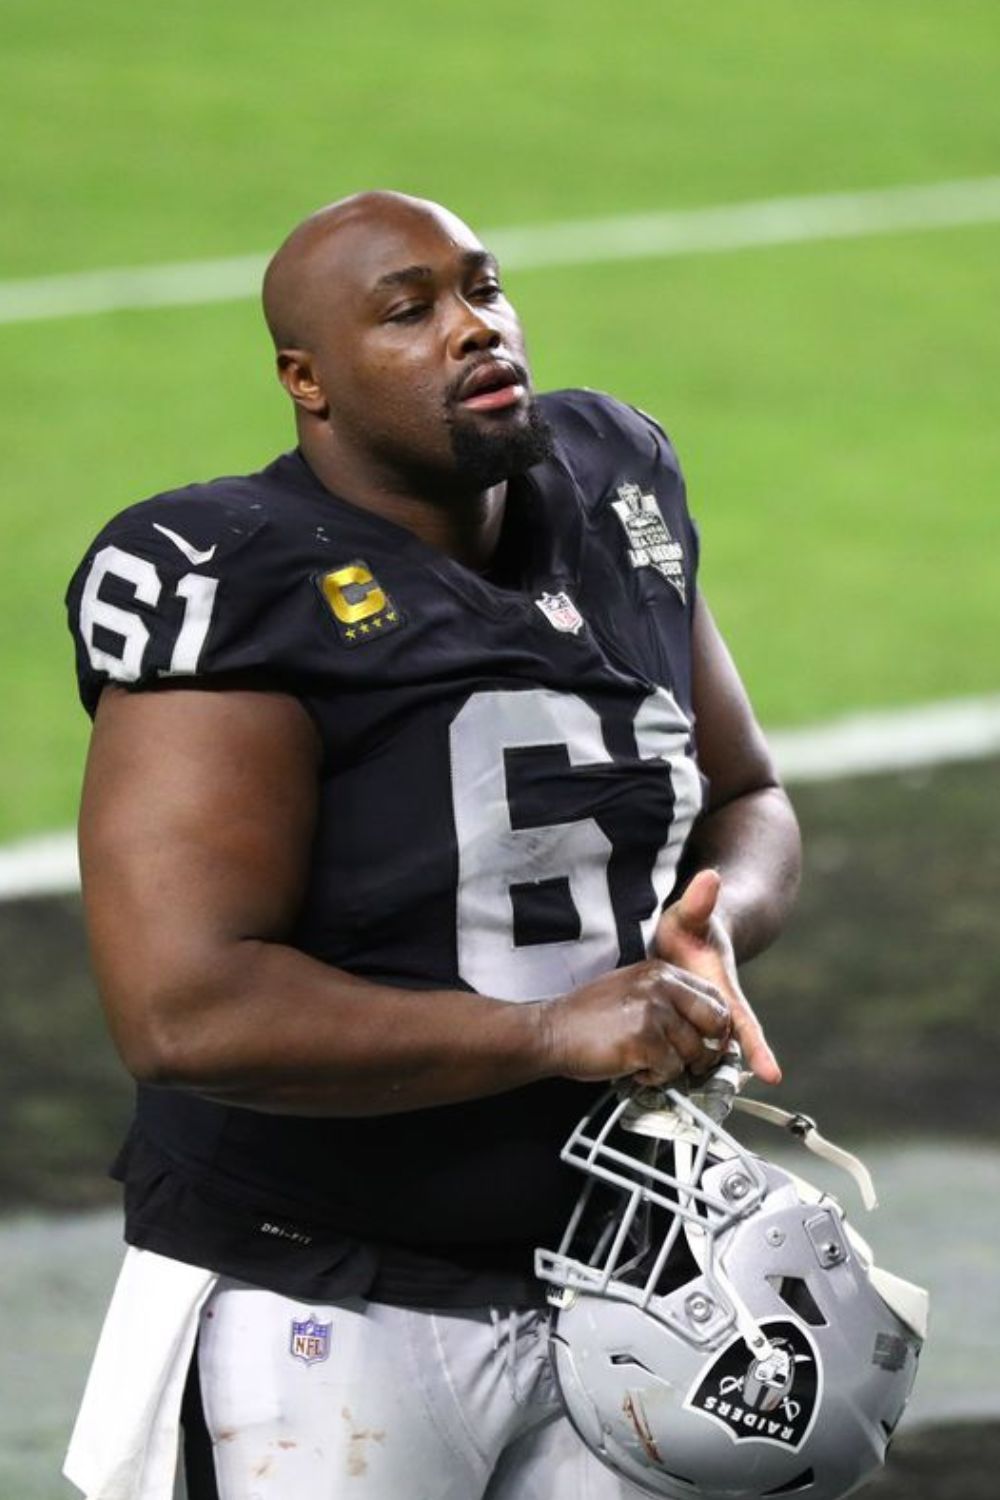 Rodney Hudson During The 2017 Season. (Source: commons.wikimedia.org)